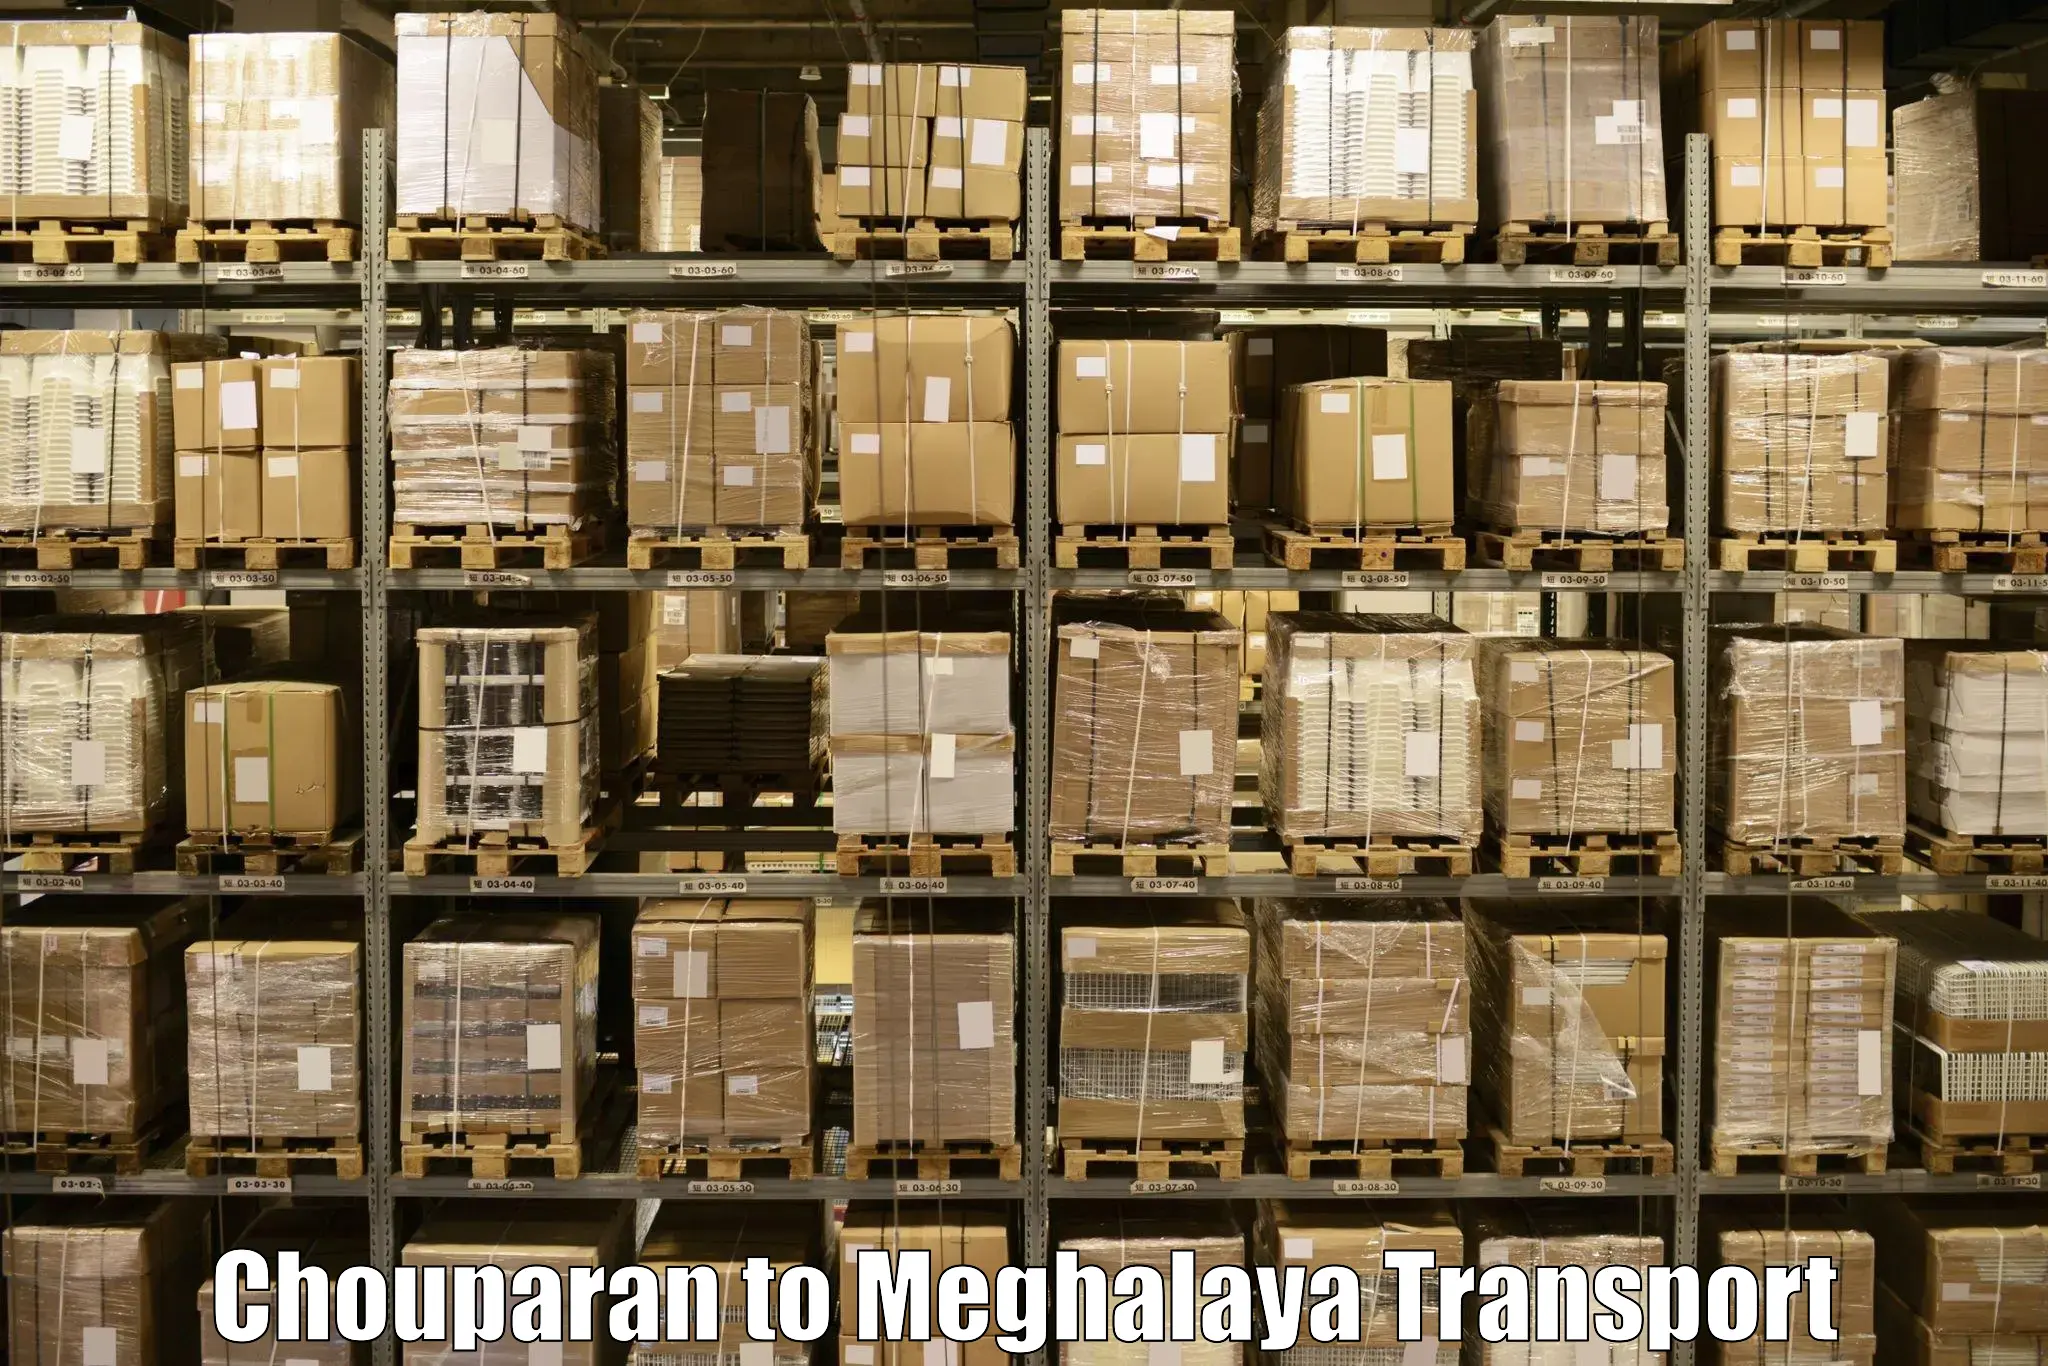 Container transportation services Chouparan to Tura